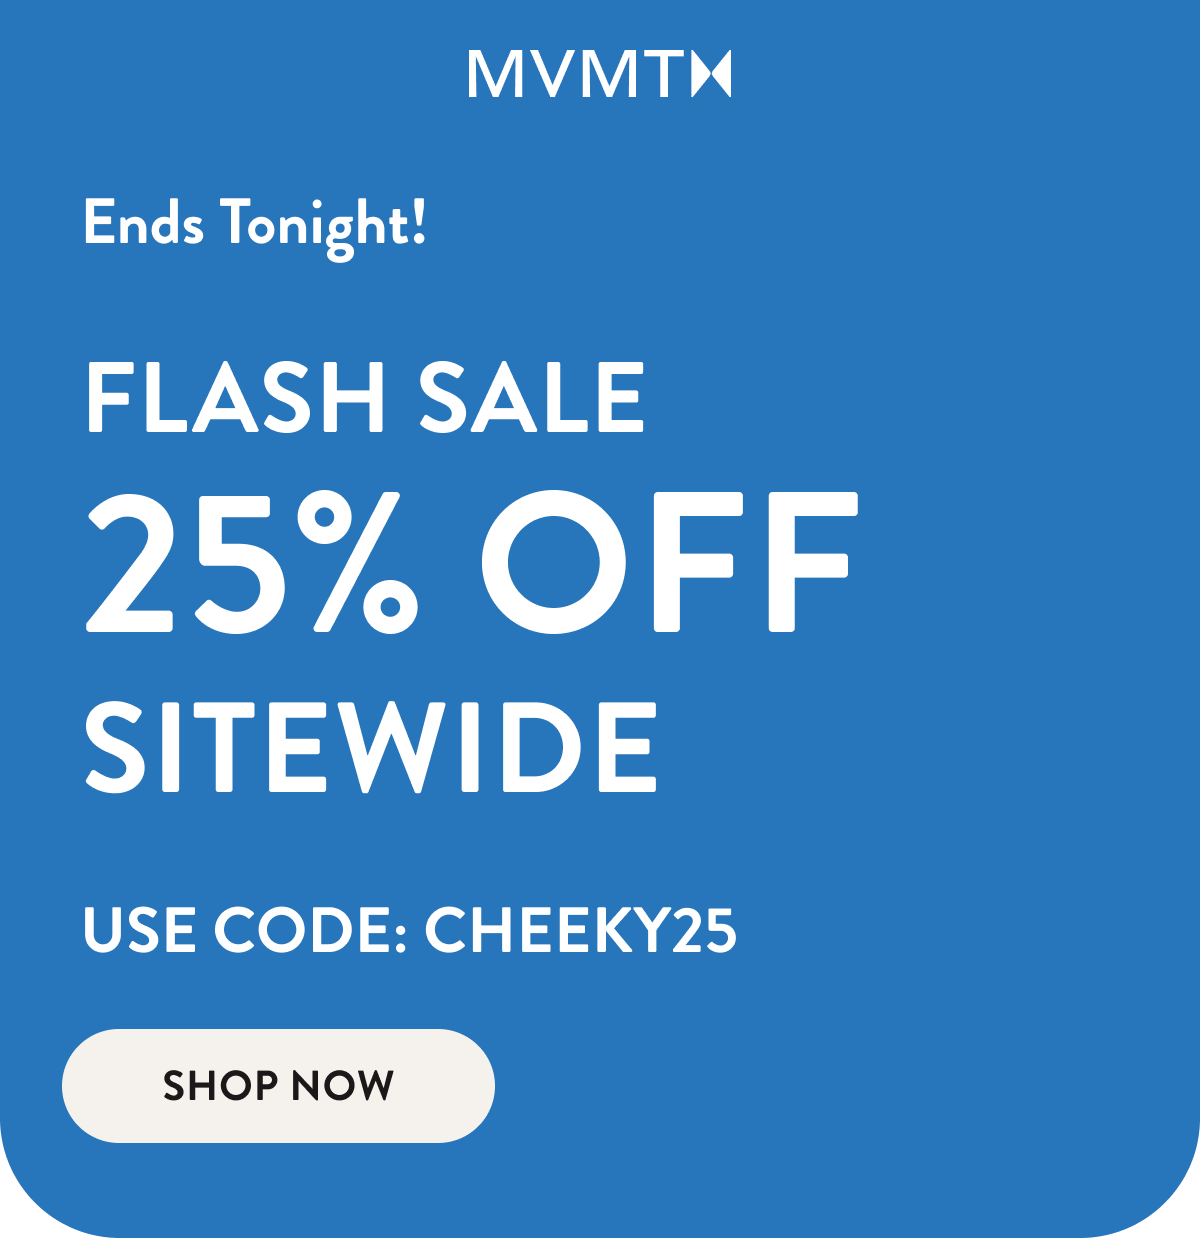 Take 25% off sitewide with code CHEEKY25